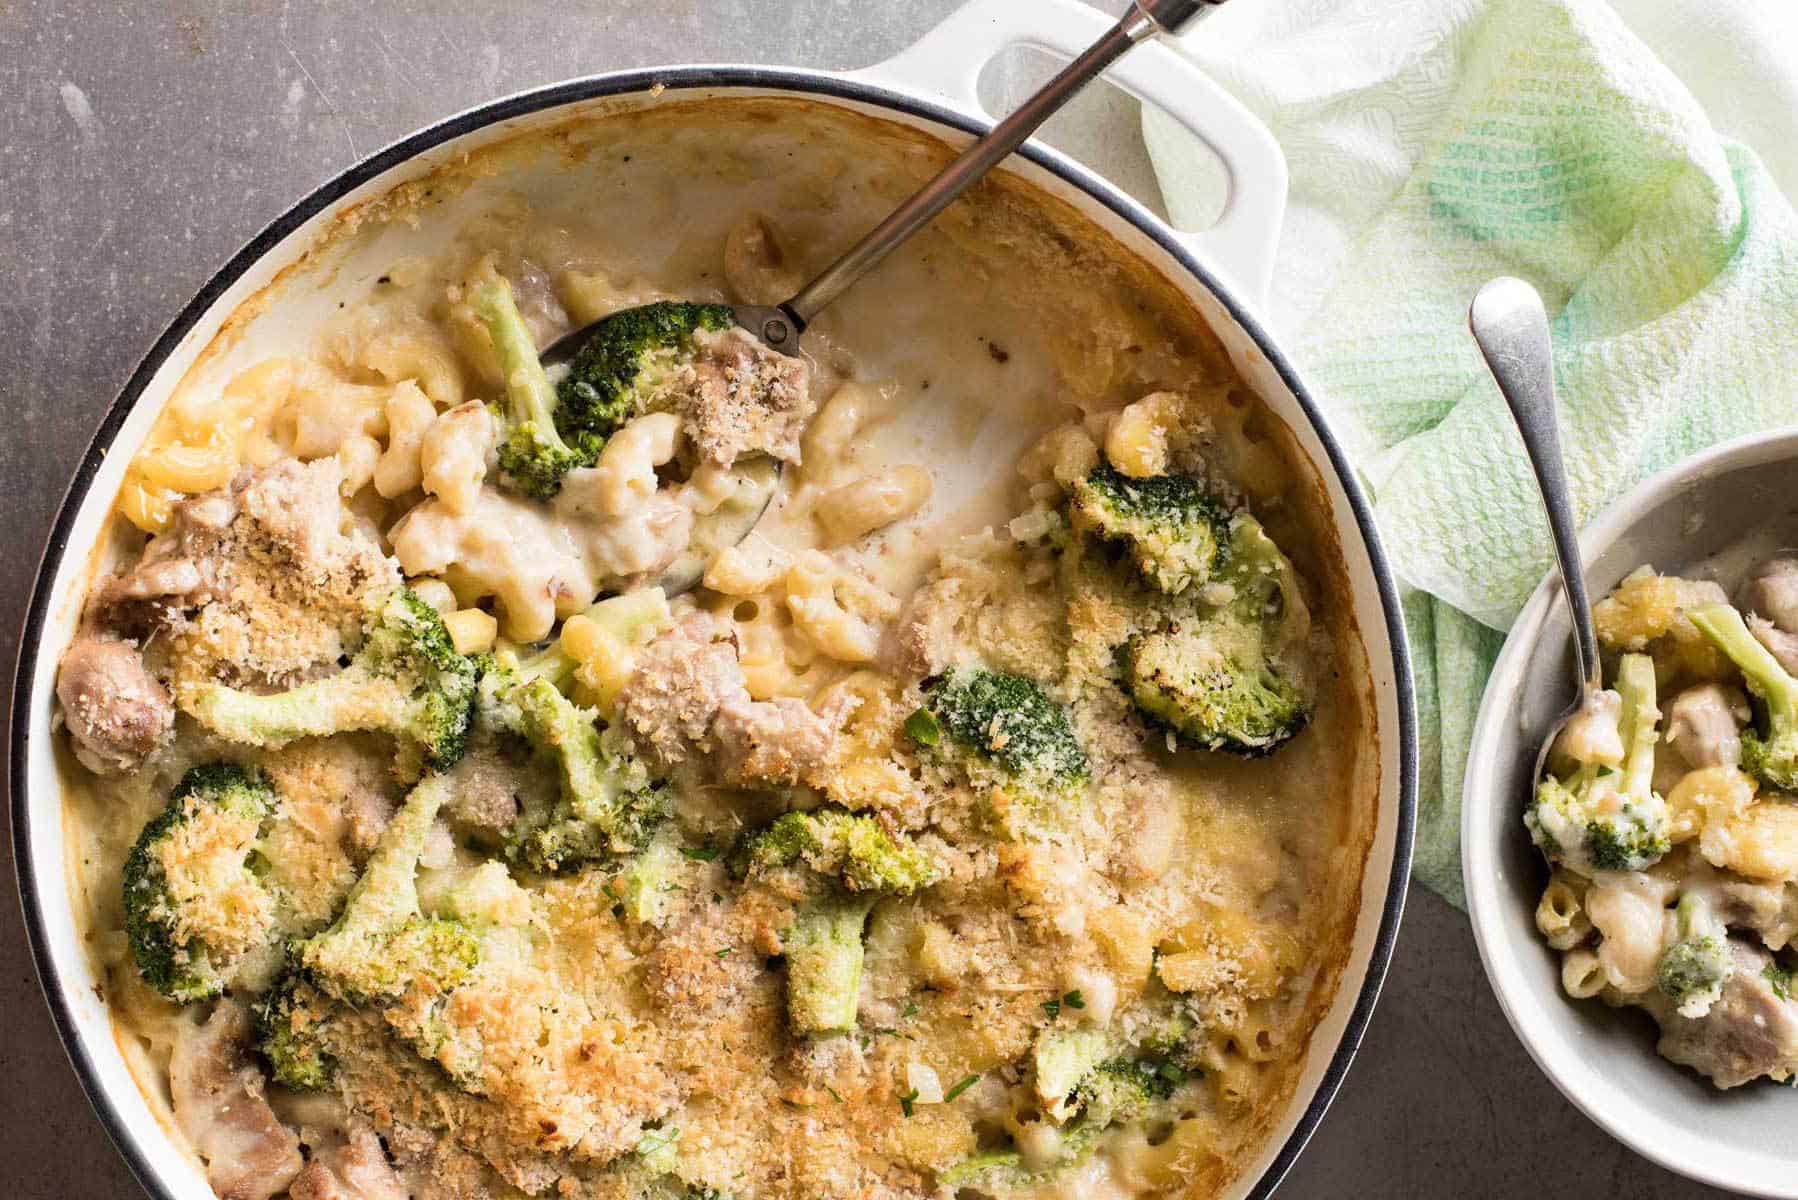 Baked Macaroni and Cheese with Chicken & Broccoli - Made in one pot, cheesy and creamy but made without a drop of cream!